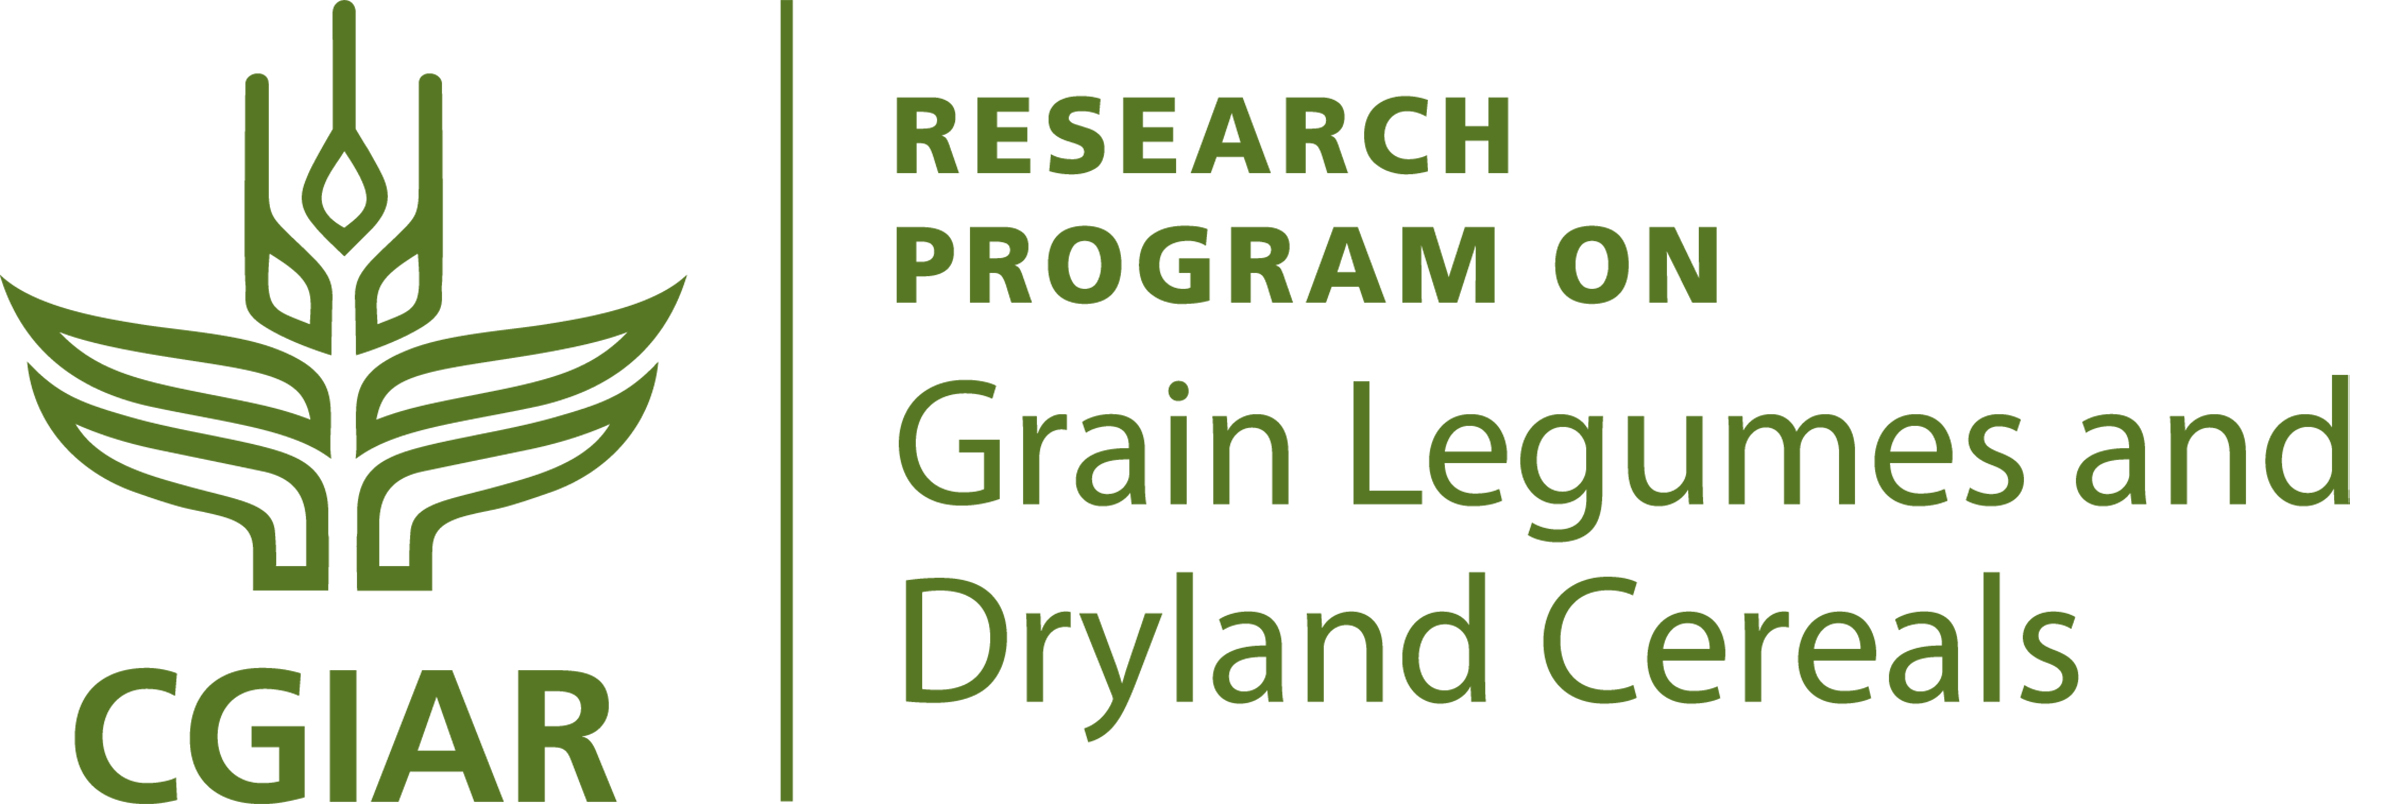 Parts of this work was undertaken as part of, and funded by the CGIAR Research Program on Grain Legumes and Dryland Cereals (GLDC) and supported by CGIAR Fund Donors.